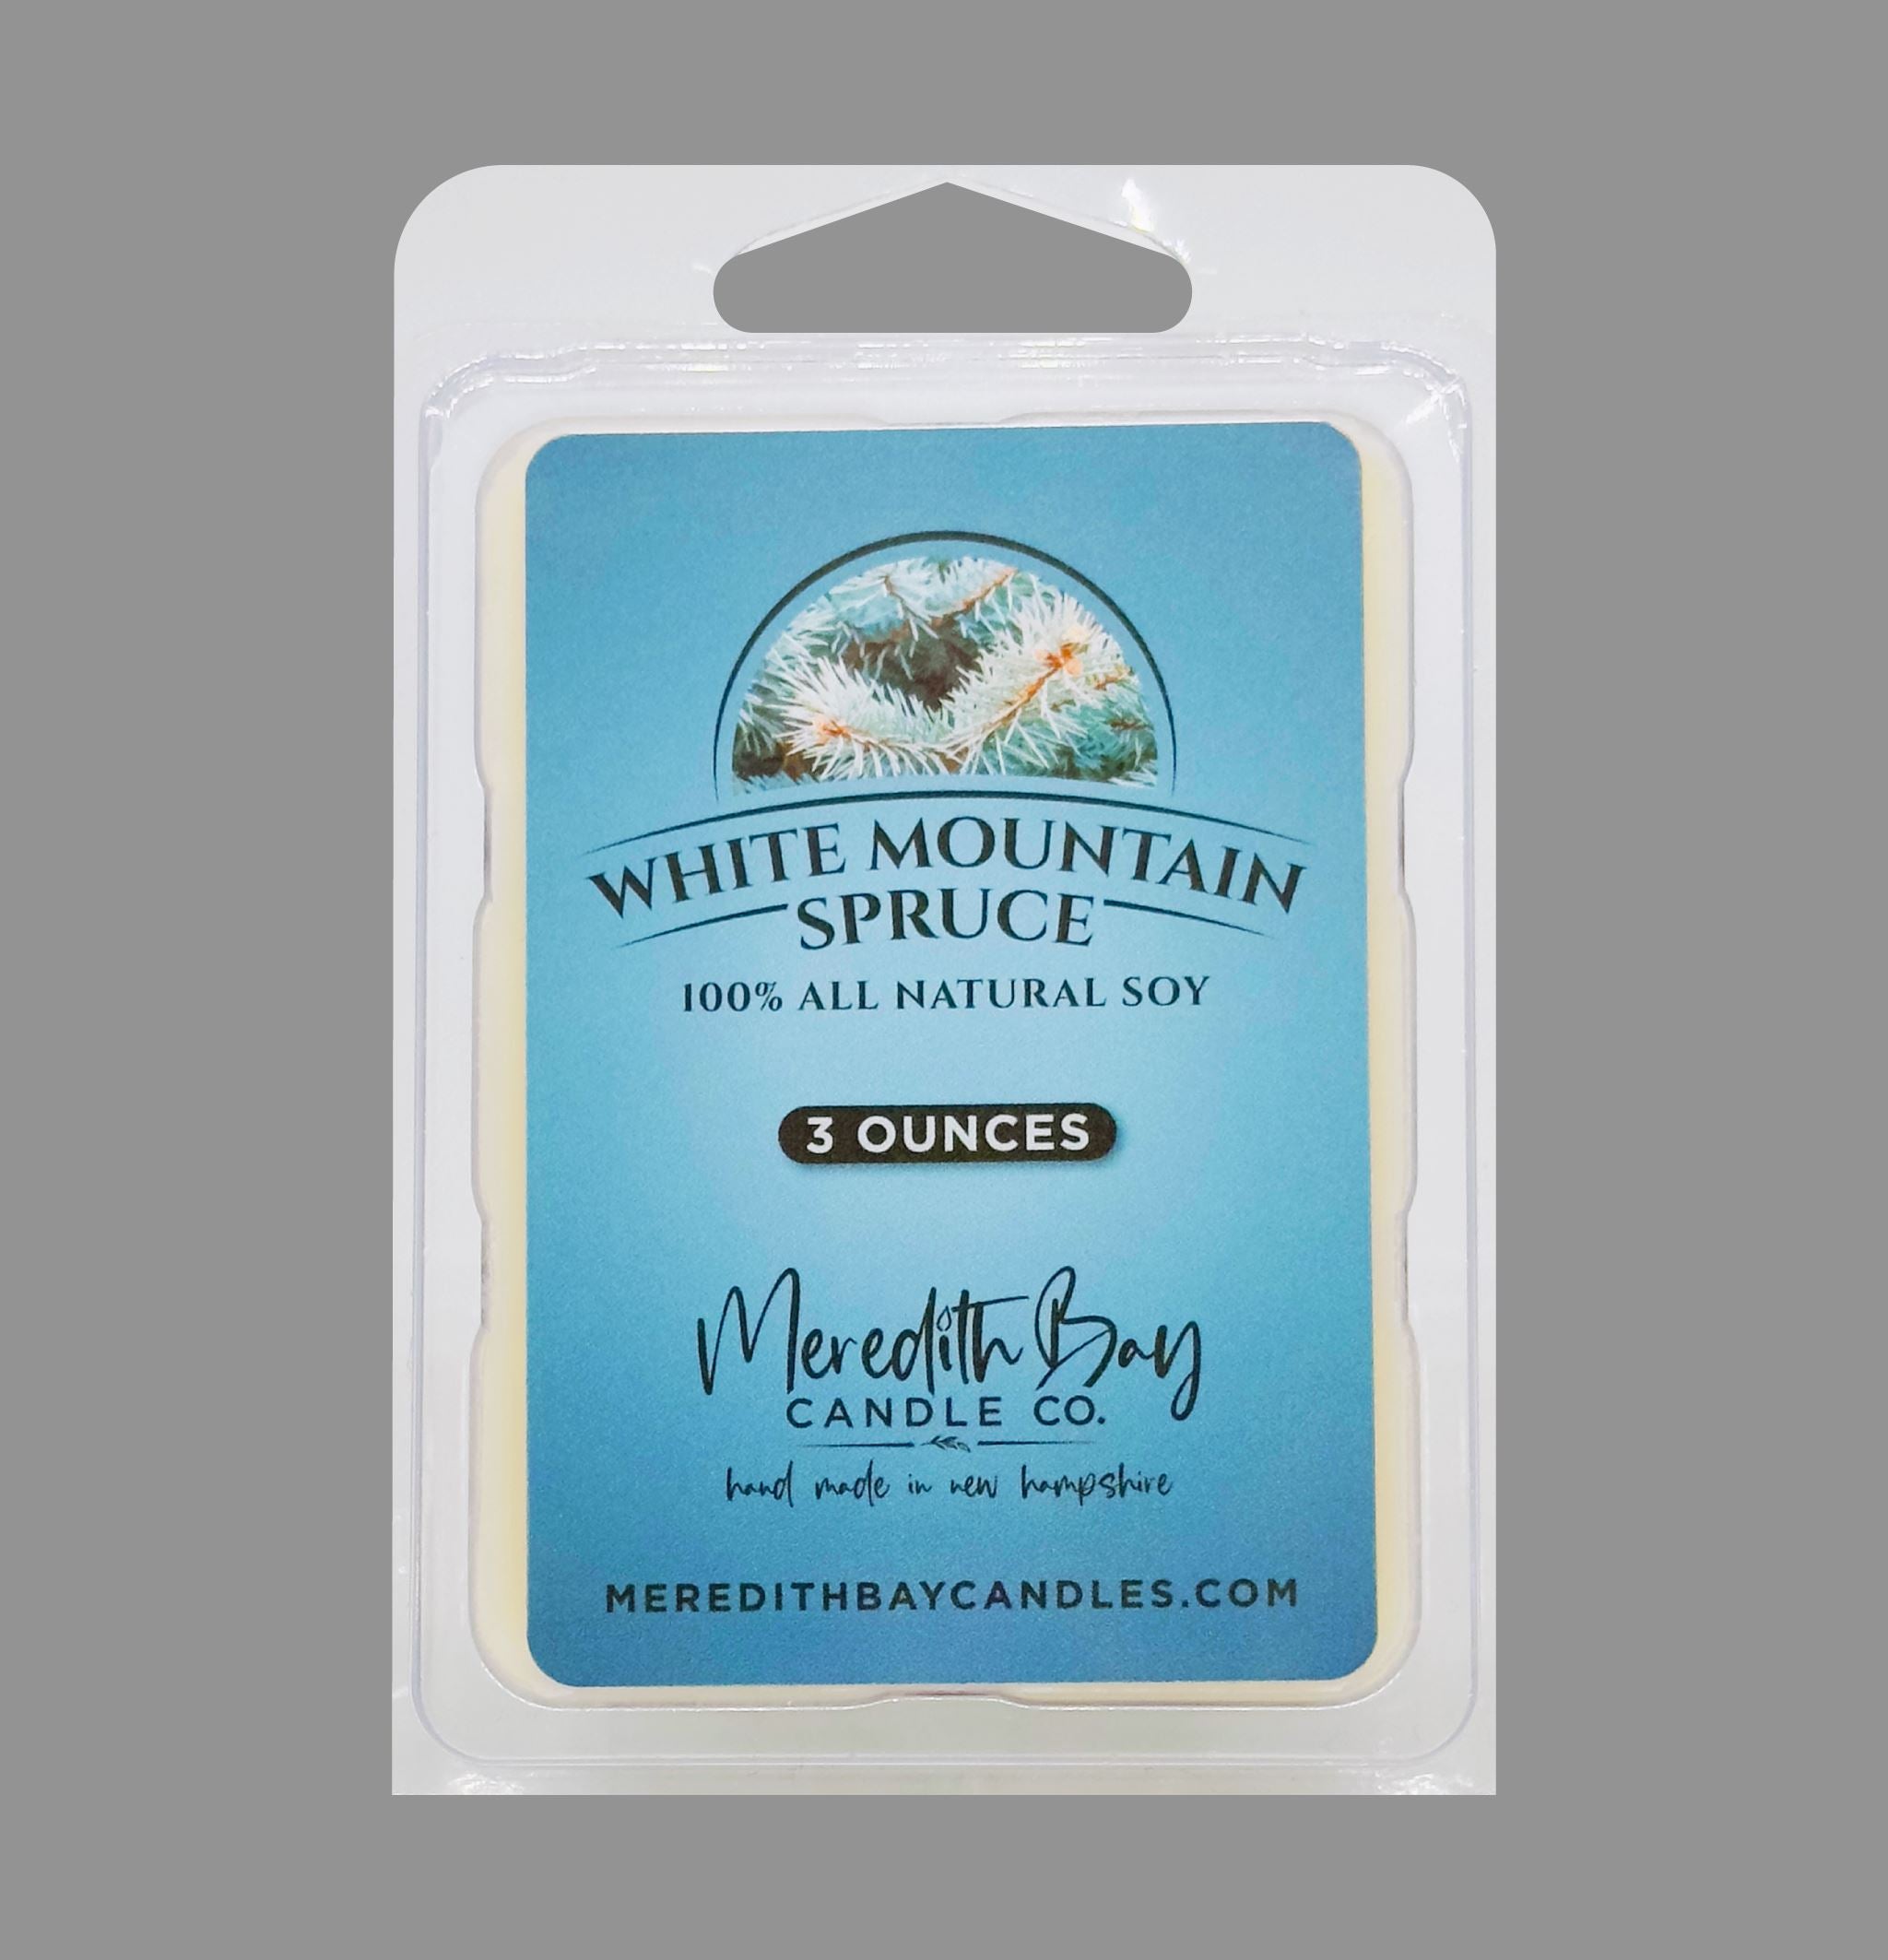 White Mountain Spruce Wax Melt Meredith Bay Candle Co 